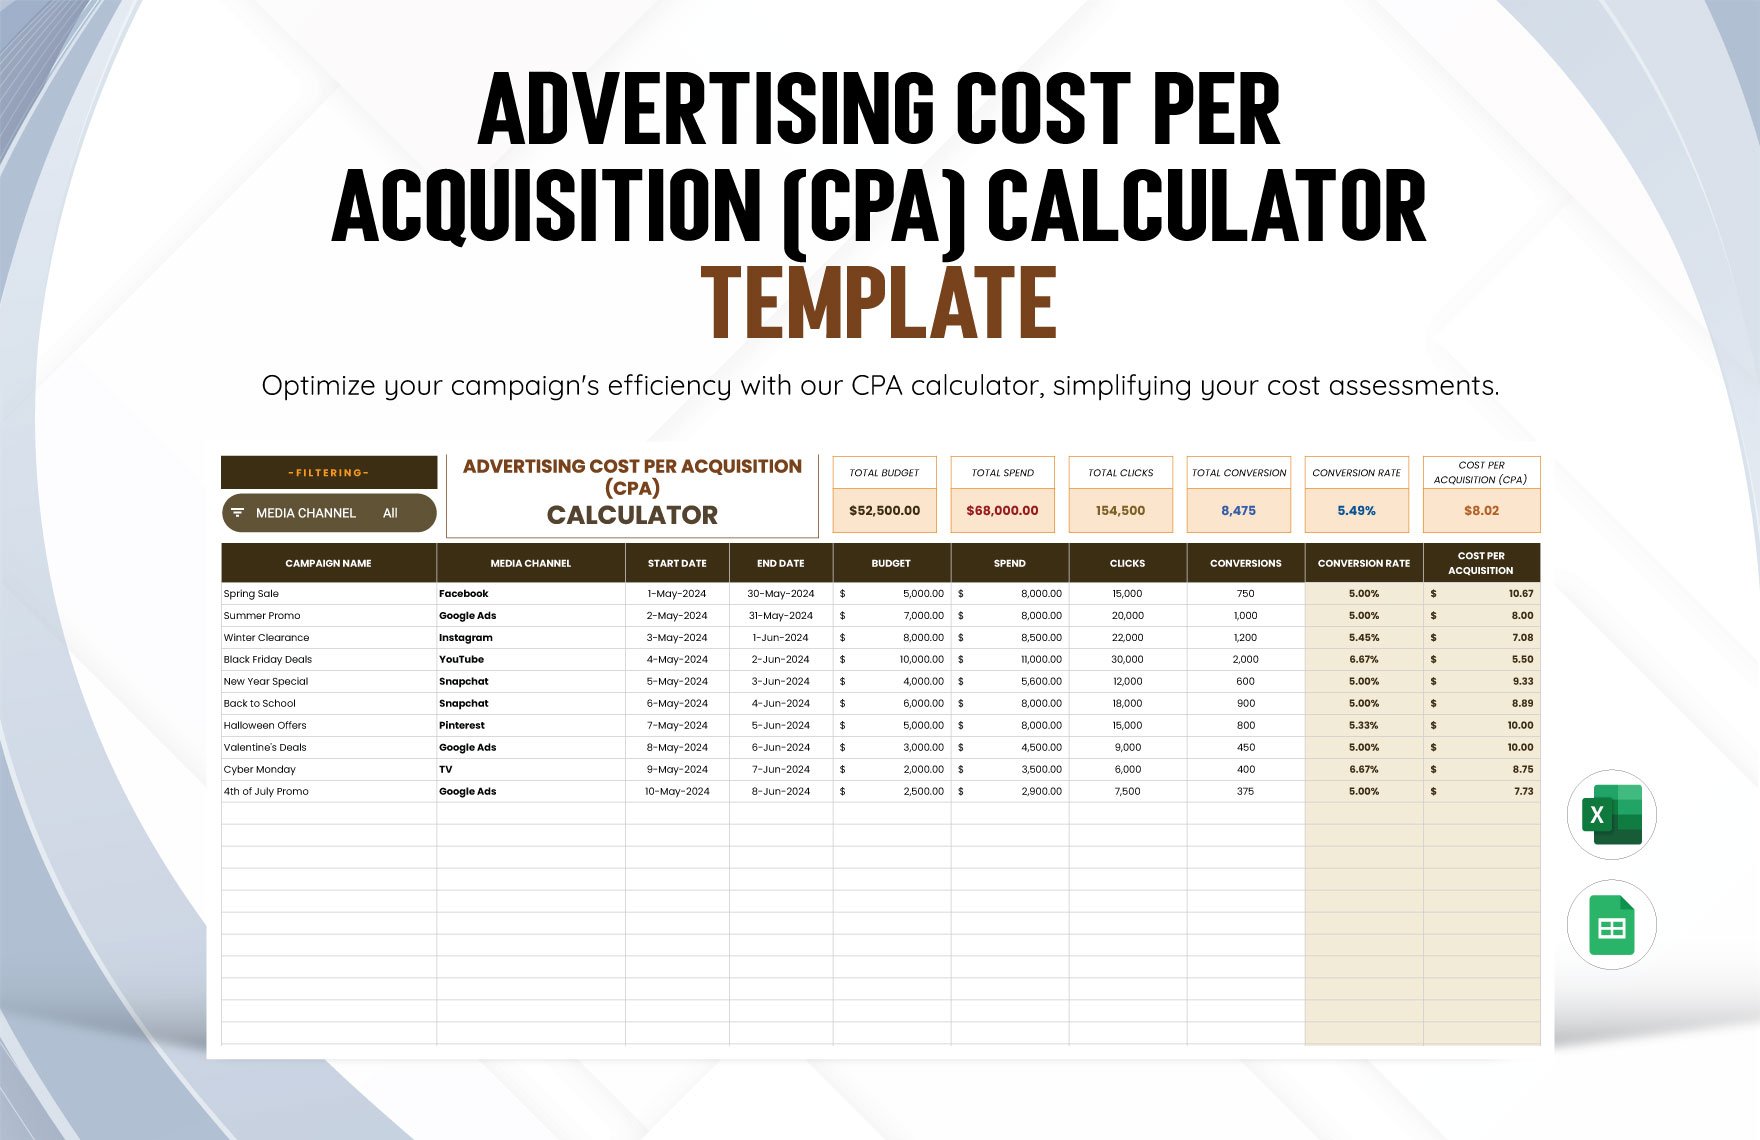 Advertising Cost Per Acquisition (CPA) Calculator Template in Excel, Google Sheets